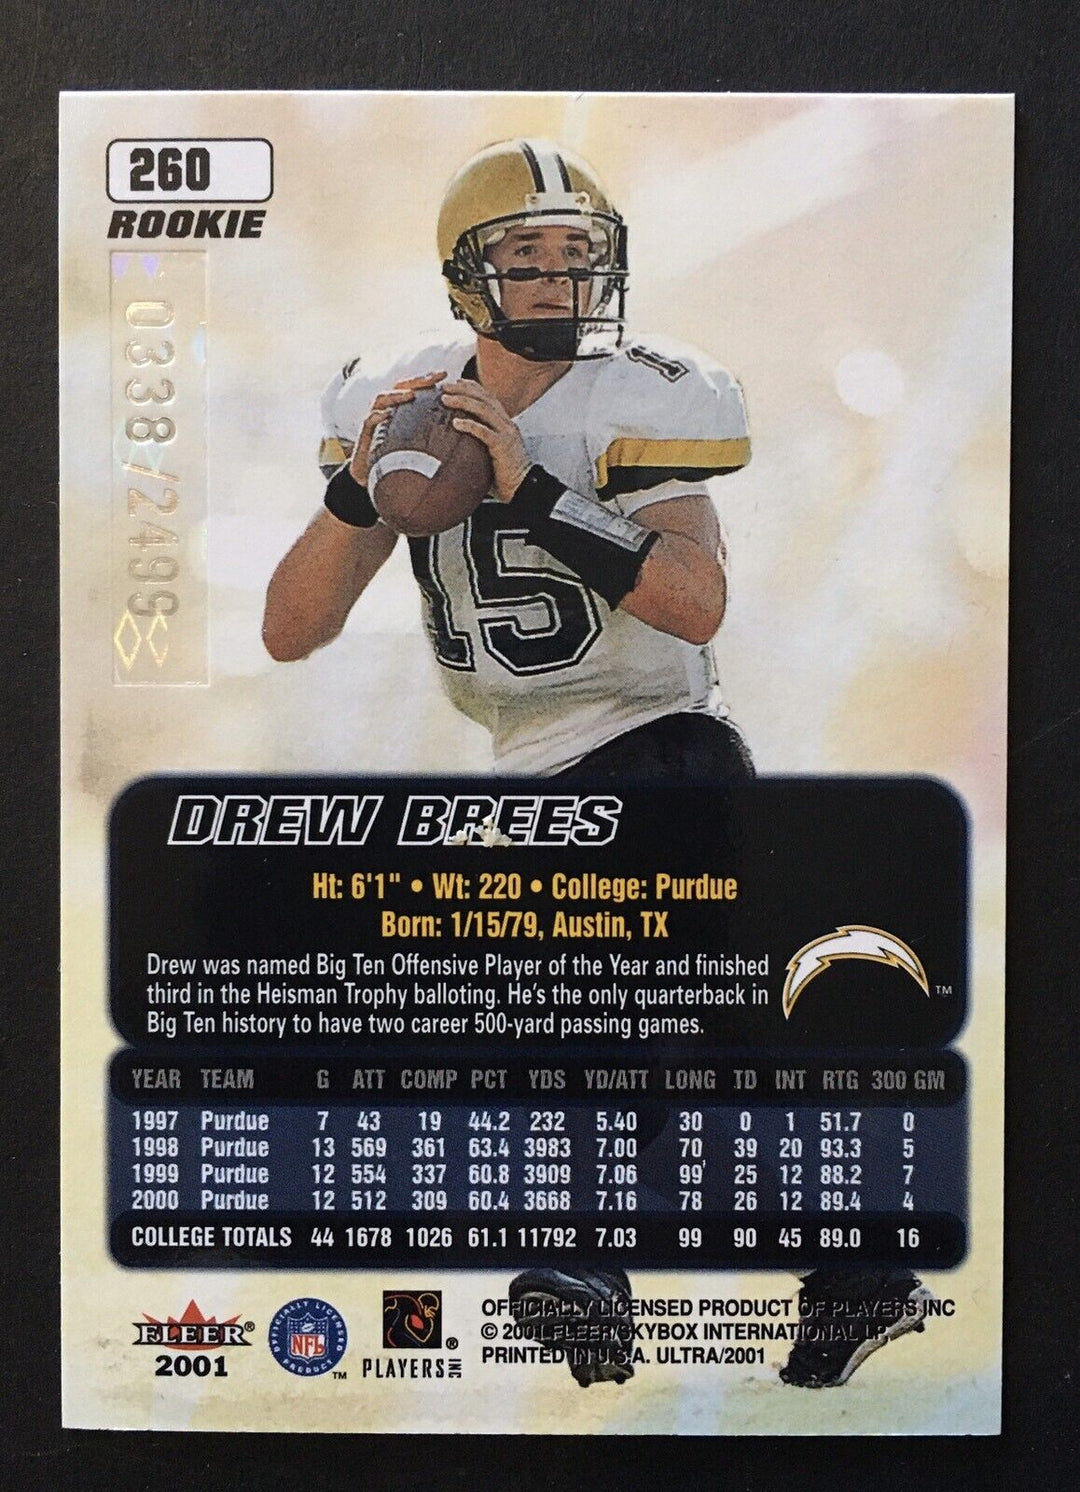 Drew Brees Fleer Ultra 2001 Rookie card # 260 Mint Le /2499 Great Card Image 2